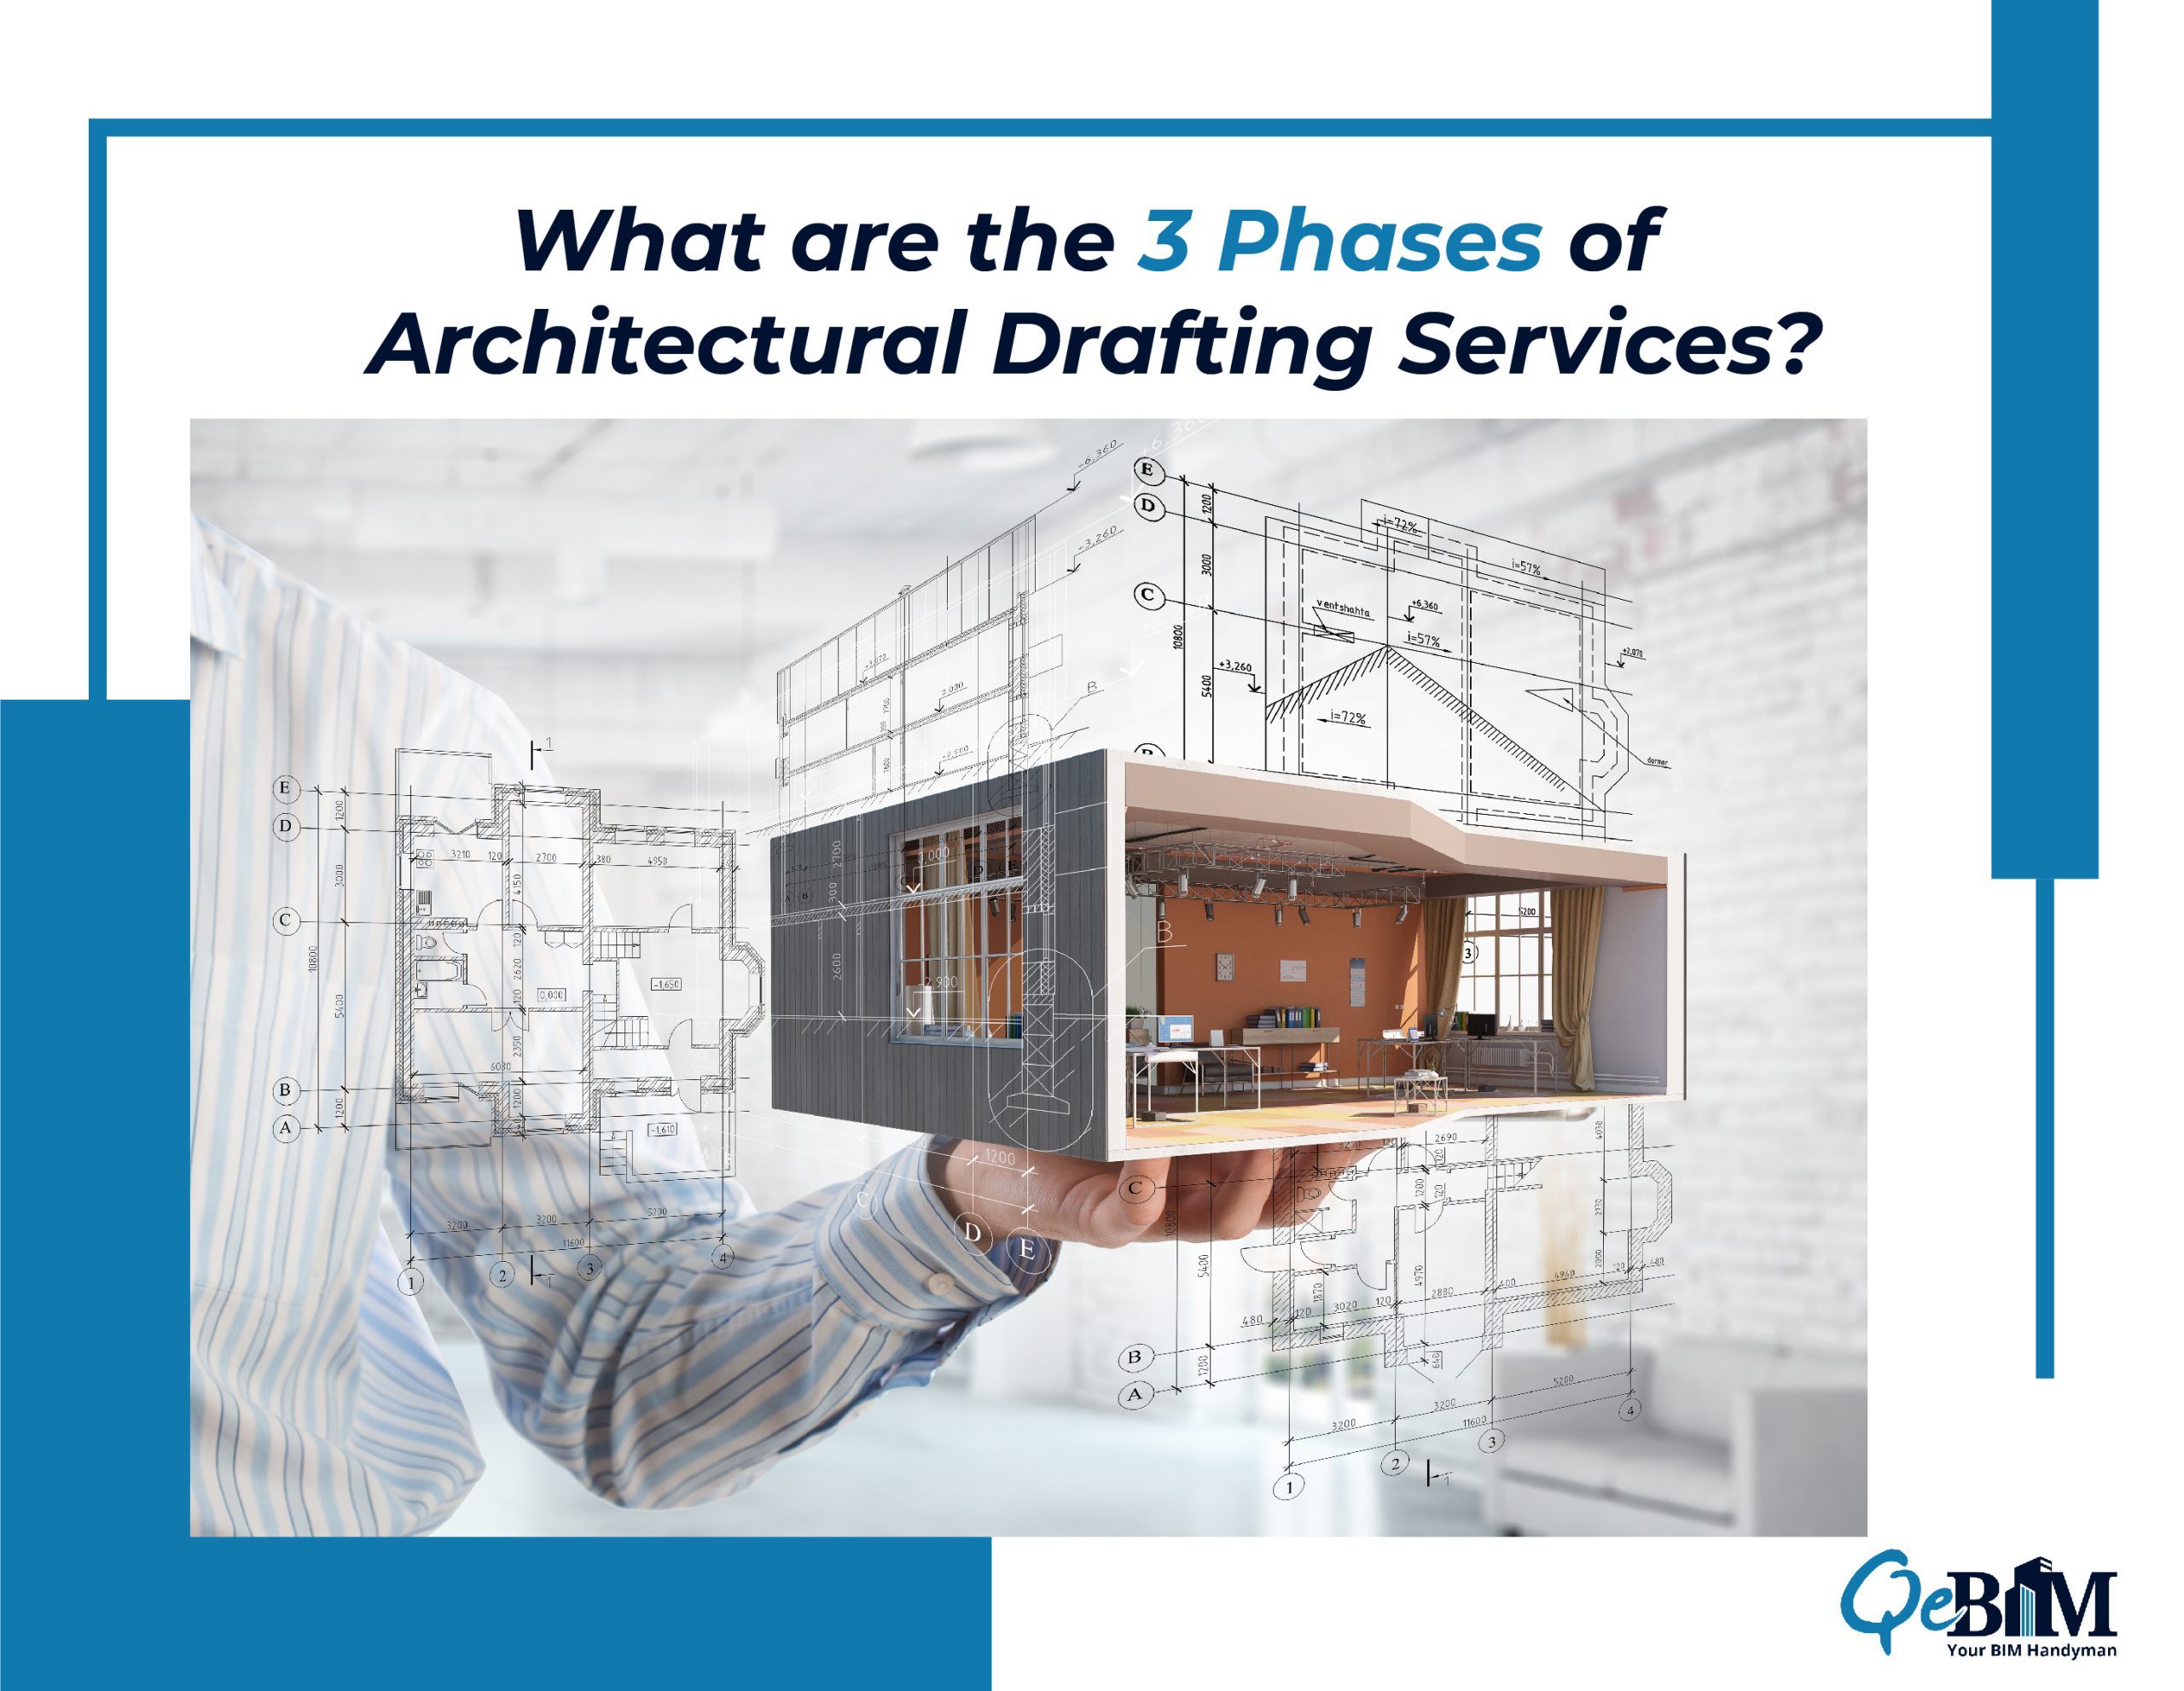 3 phases of Architectural Drafting Services